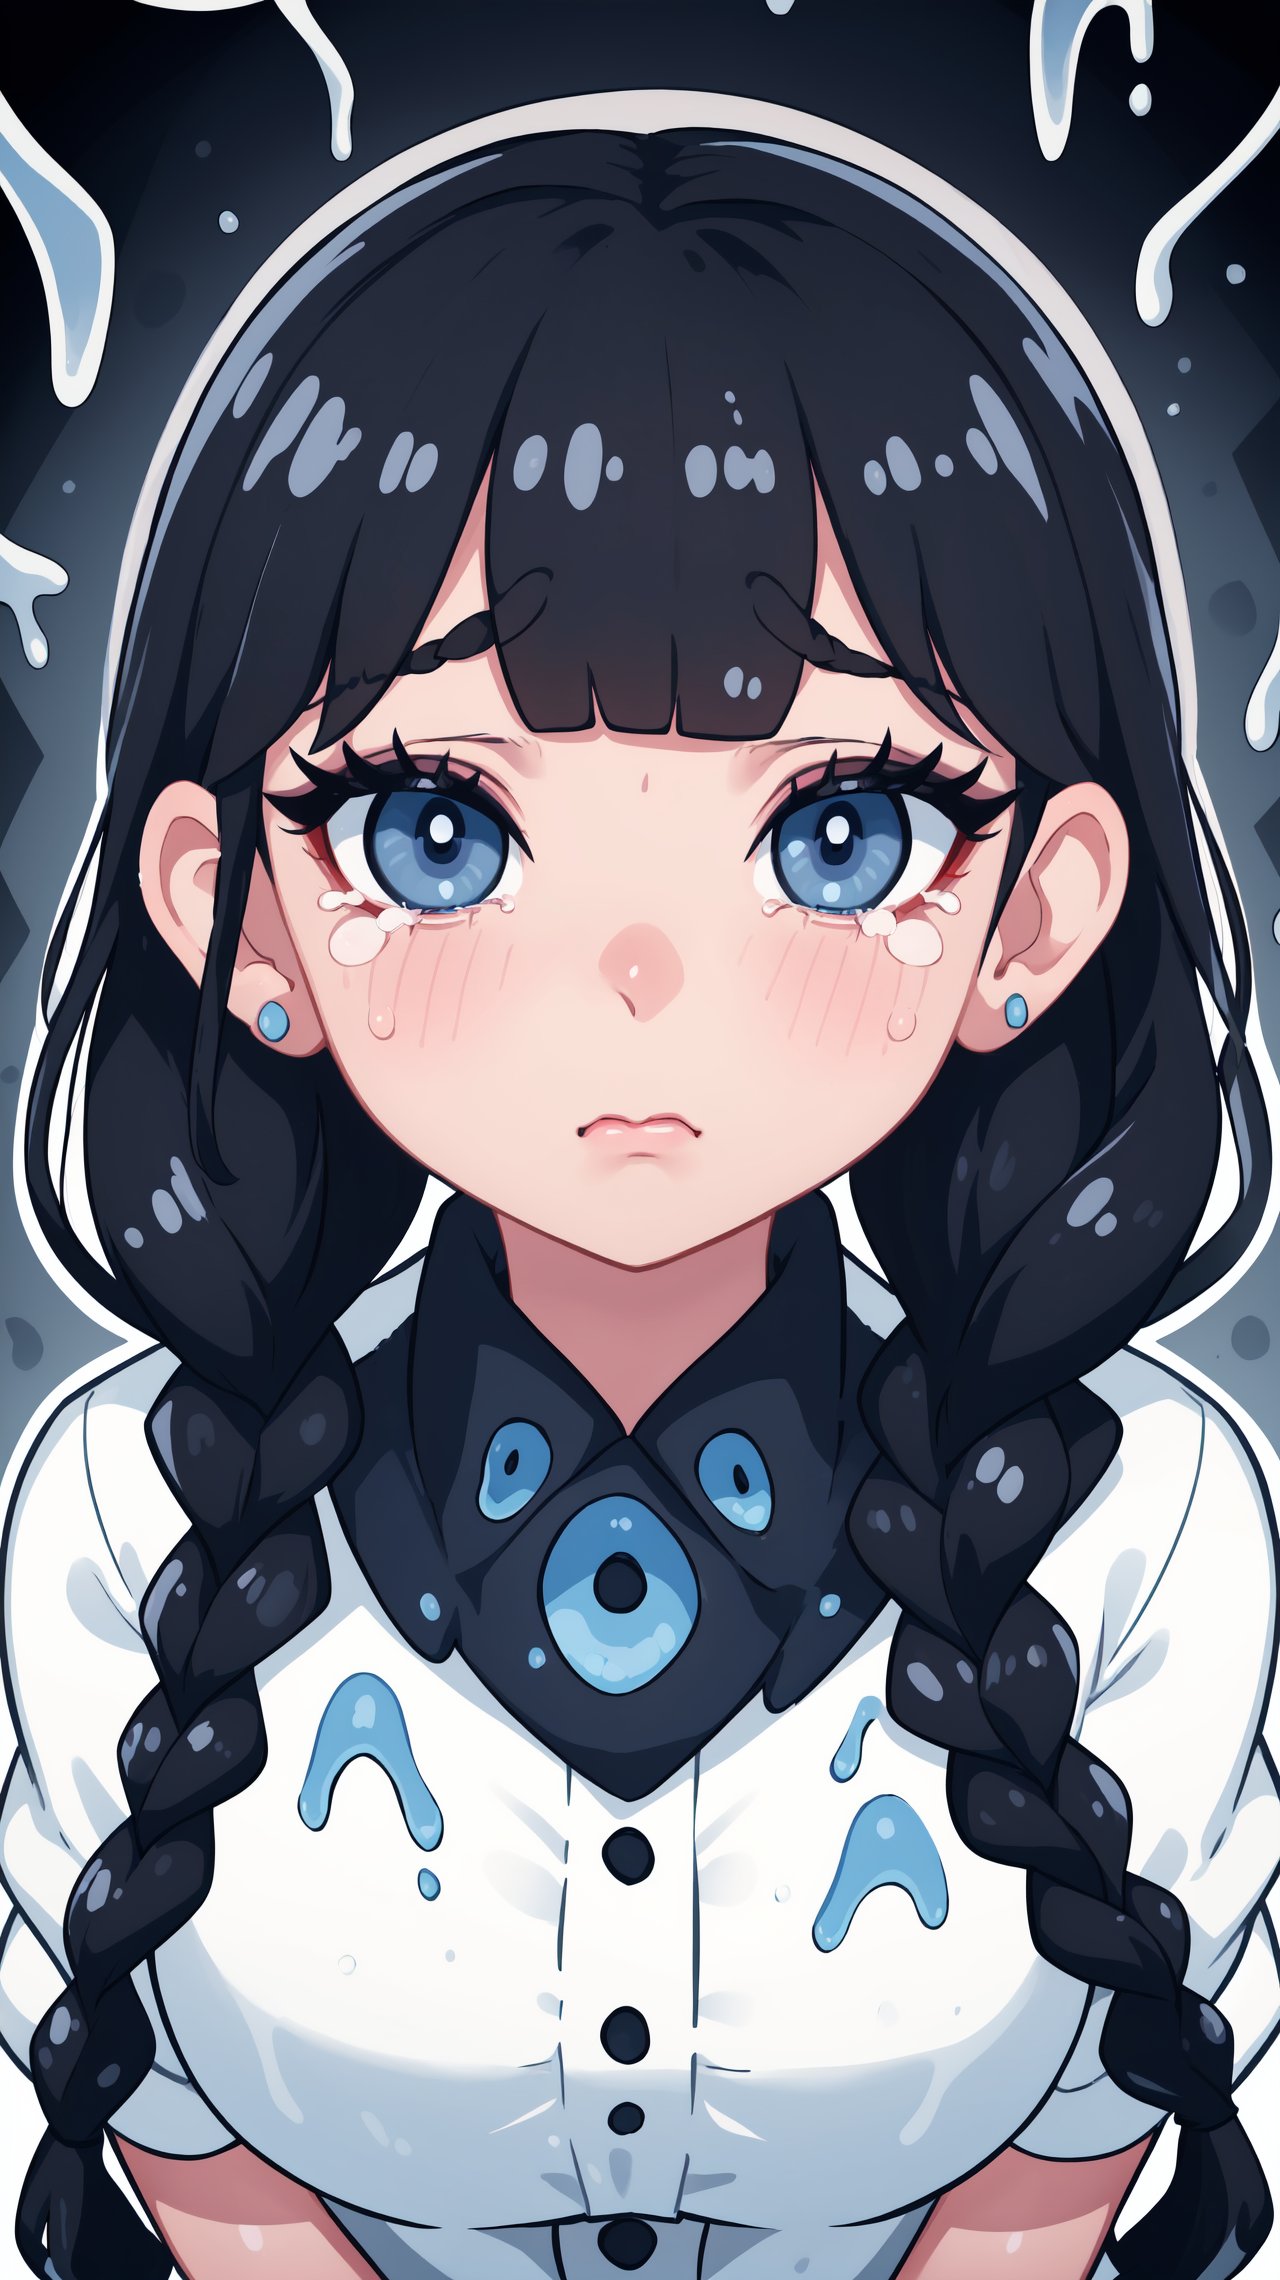 corneo runny makeup, adult woman, mascara, heavy makeup, mascara Tears, runny makeup, tears, (1girl:perfect face, cute, black hair in 1 three-strand braid, dark blue eyes, petite), face and body covered in runny white slime